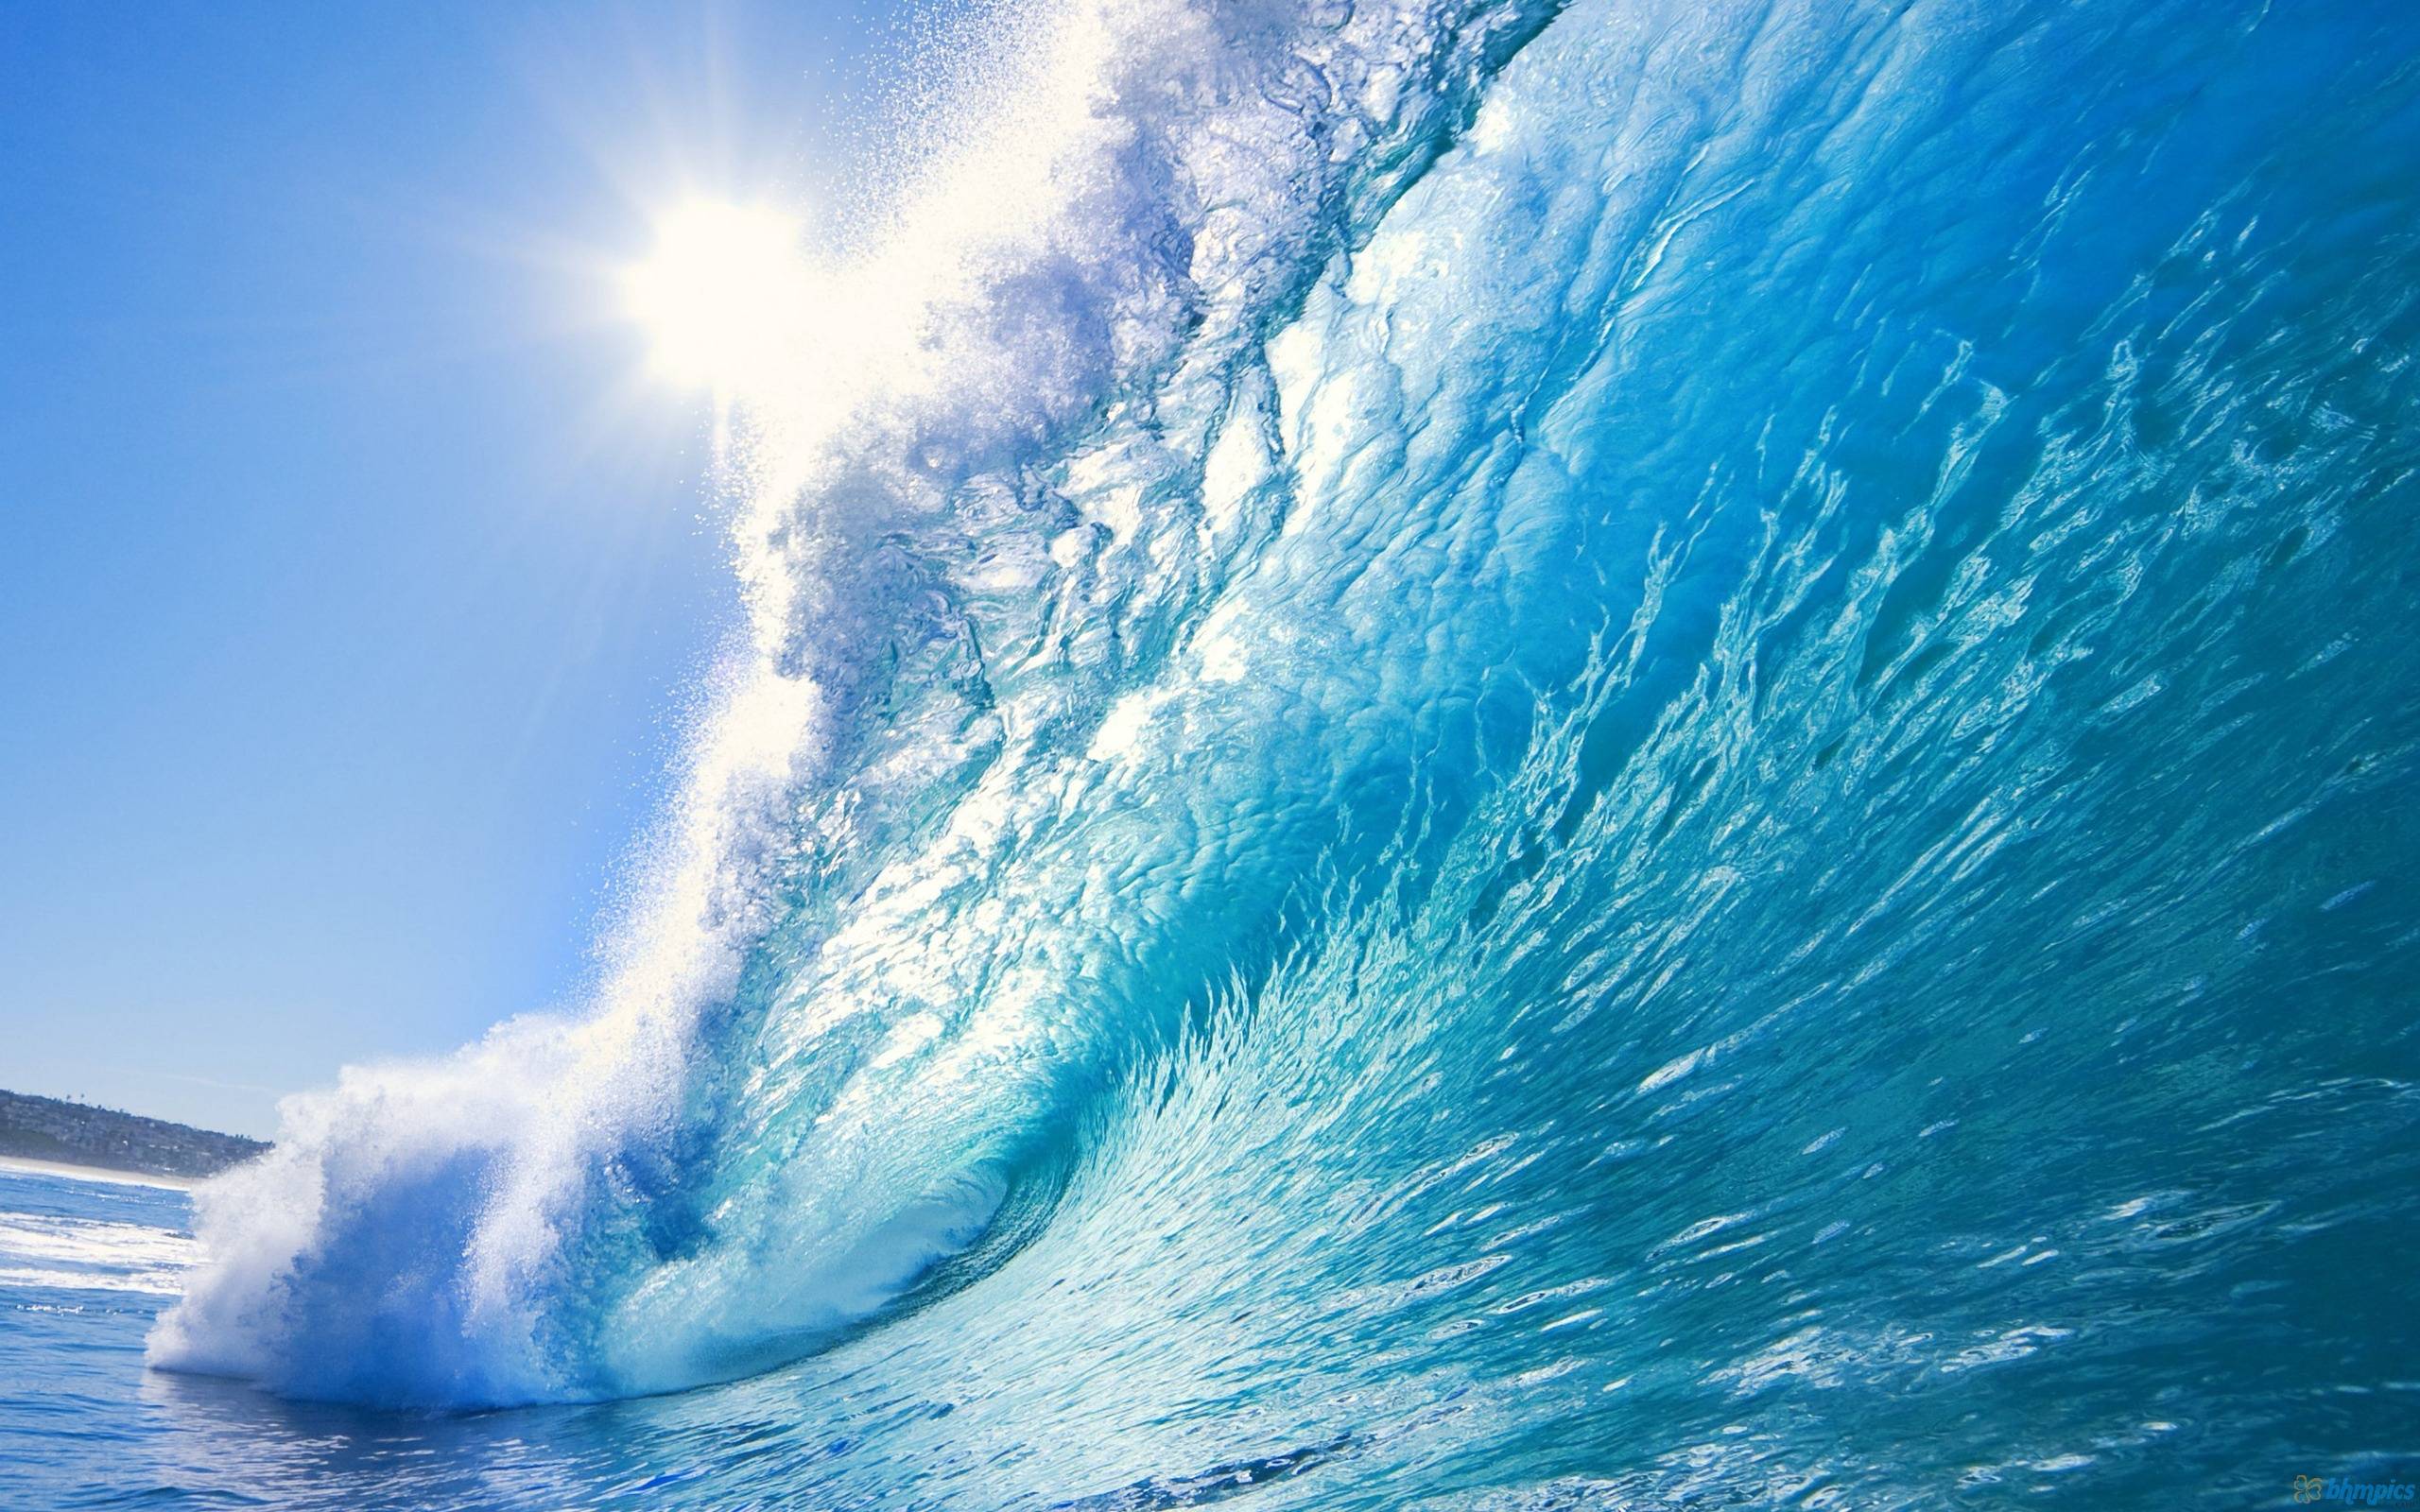 Awesome Wave Wallpaper to Decorate Background Like an Apple